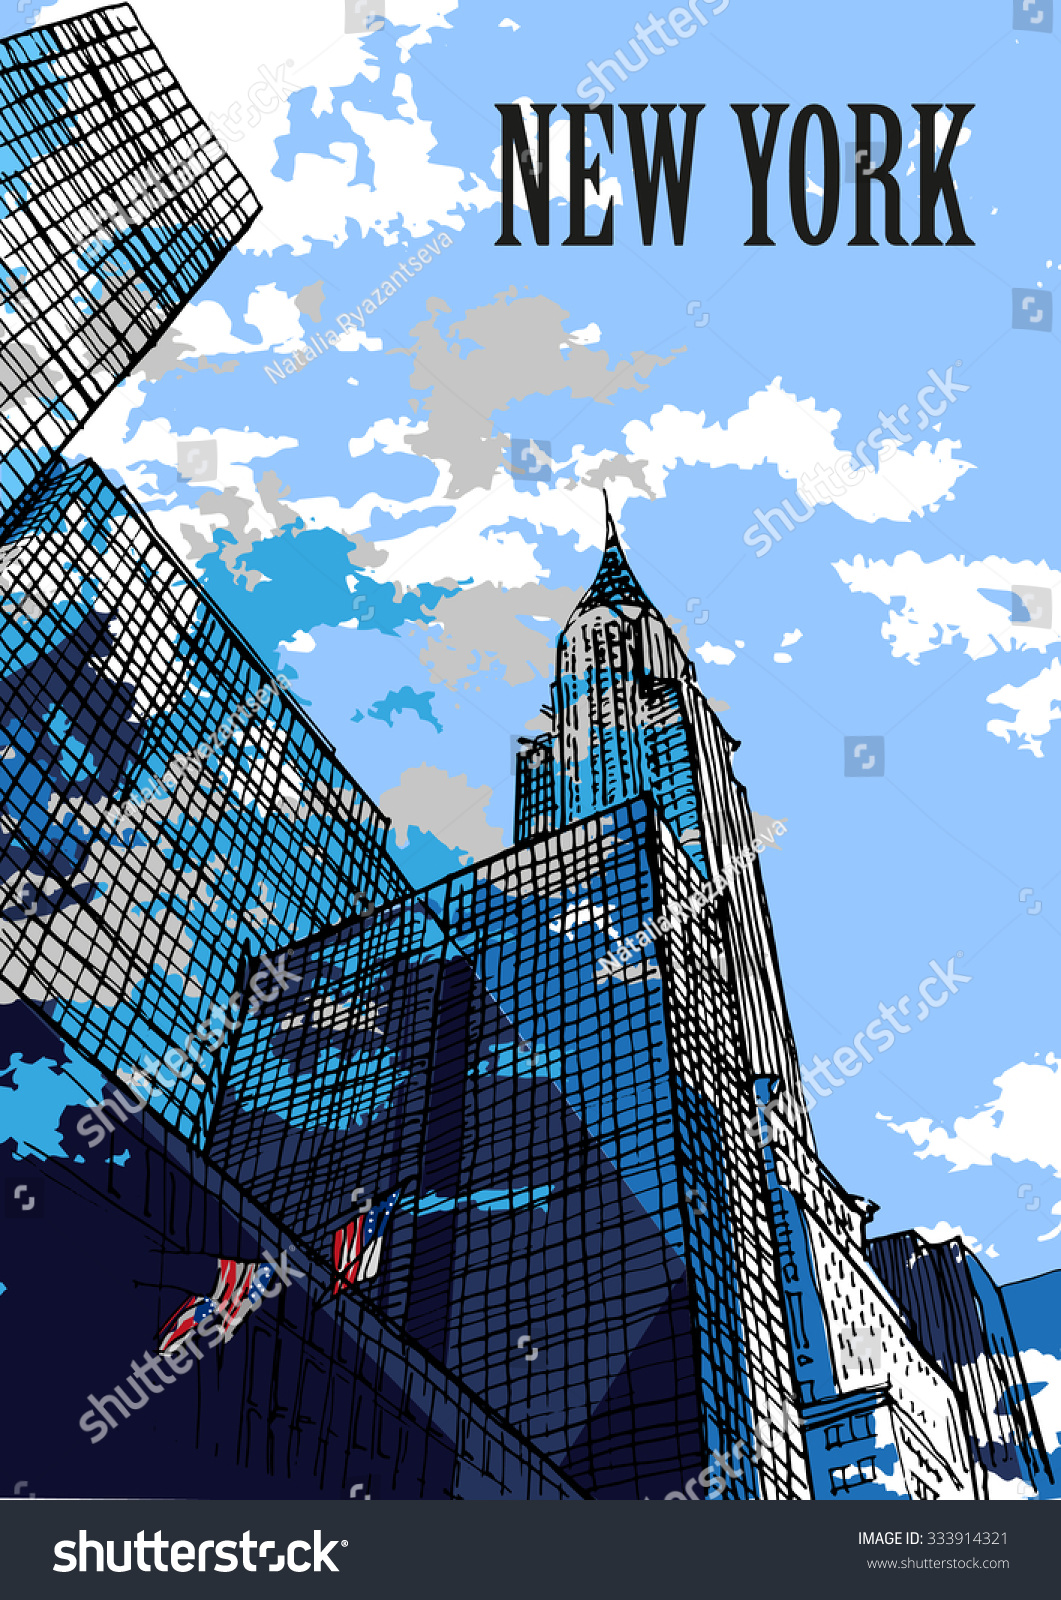 SVG of CHRYSLER BUILDING, NEW YORK, USA: Chrysler building and skyscrapers, hand drawn sketch, vector. svg